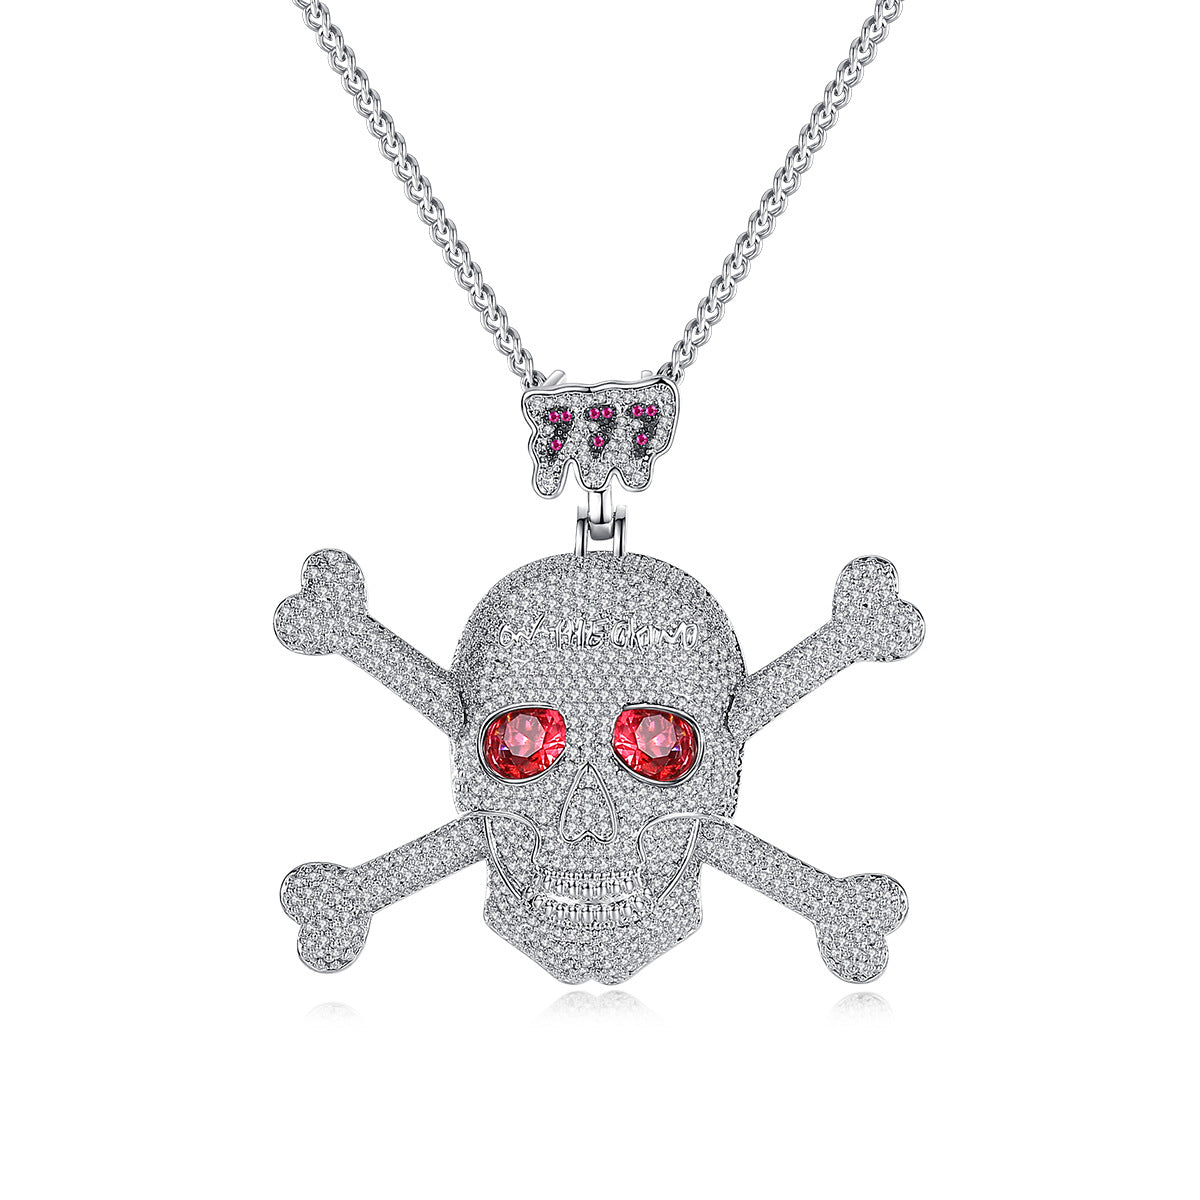 Skull and Crossbones Necklace xccscss.